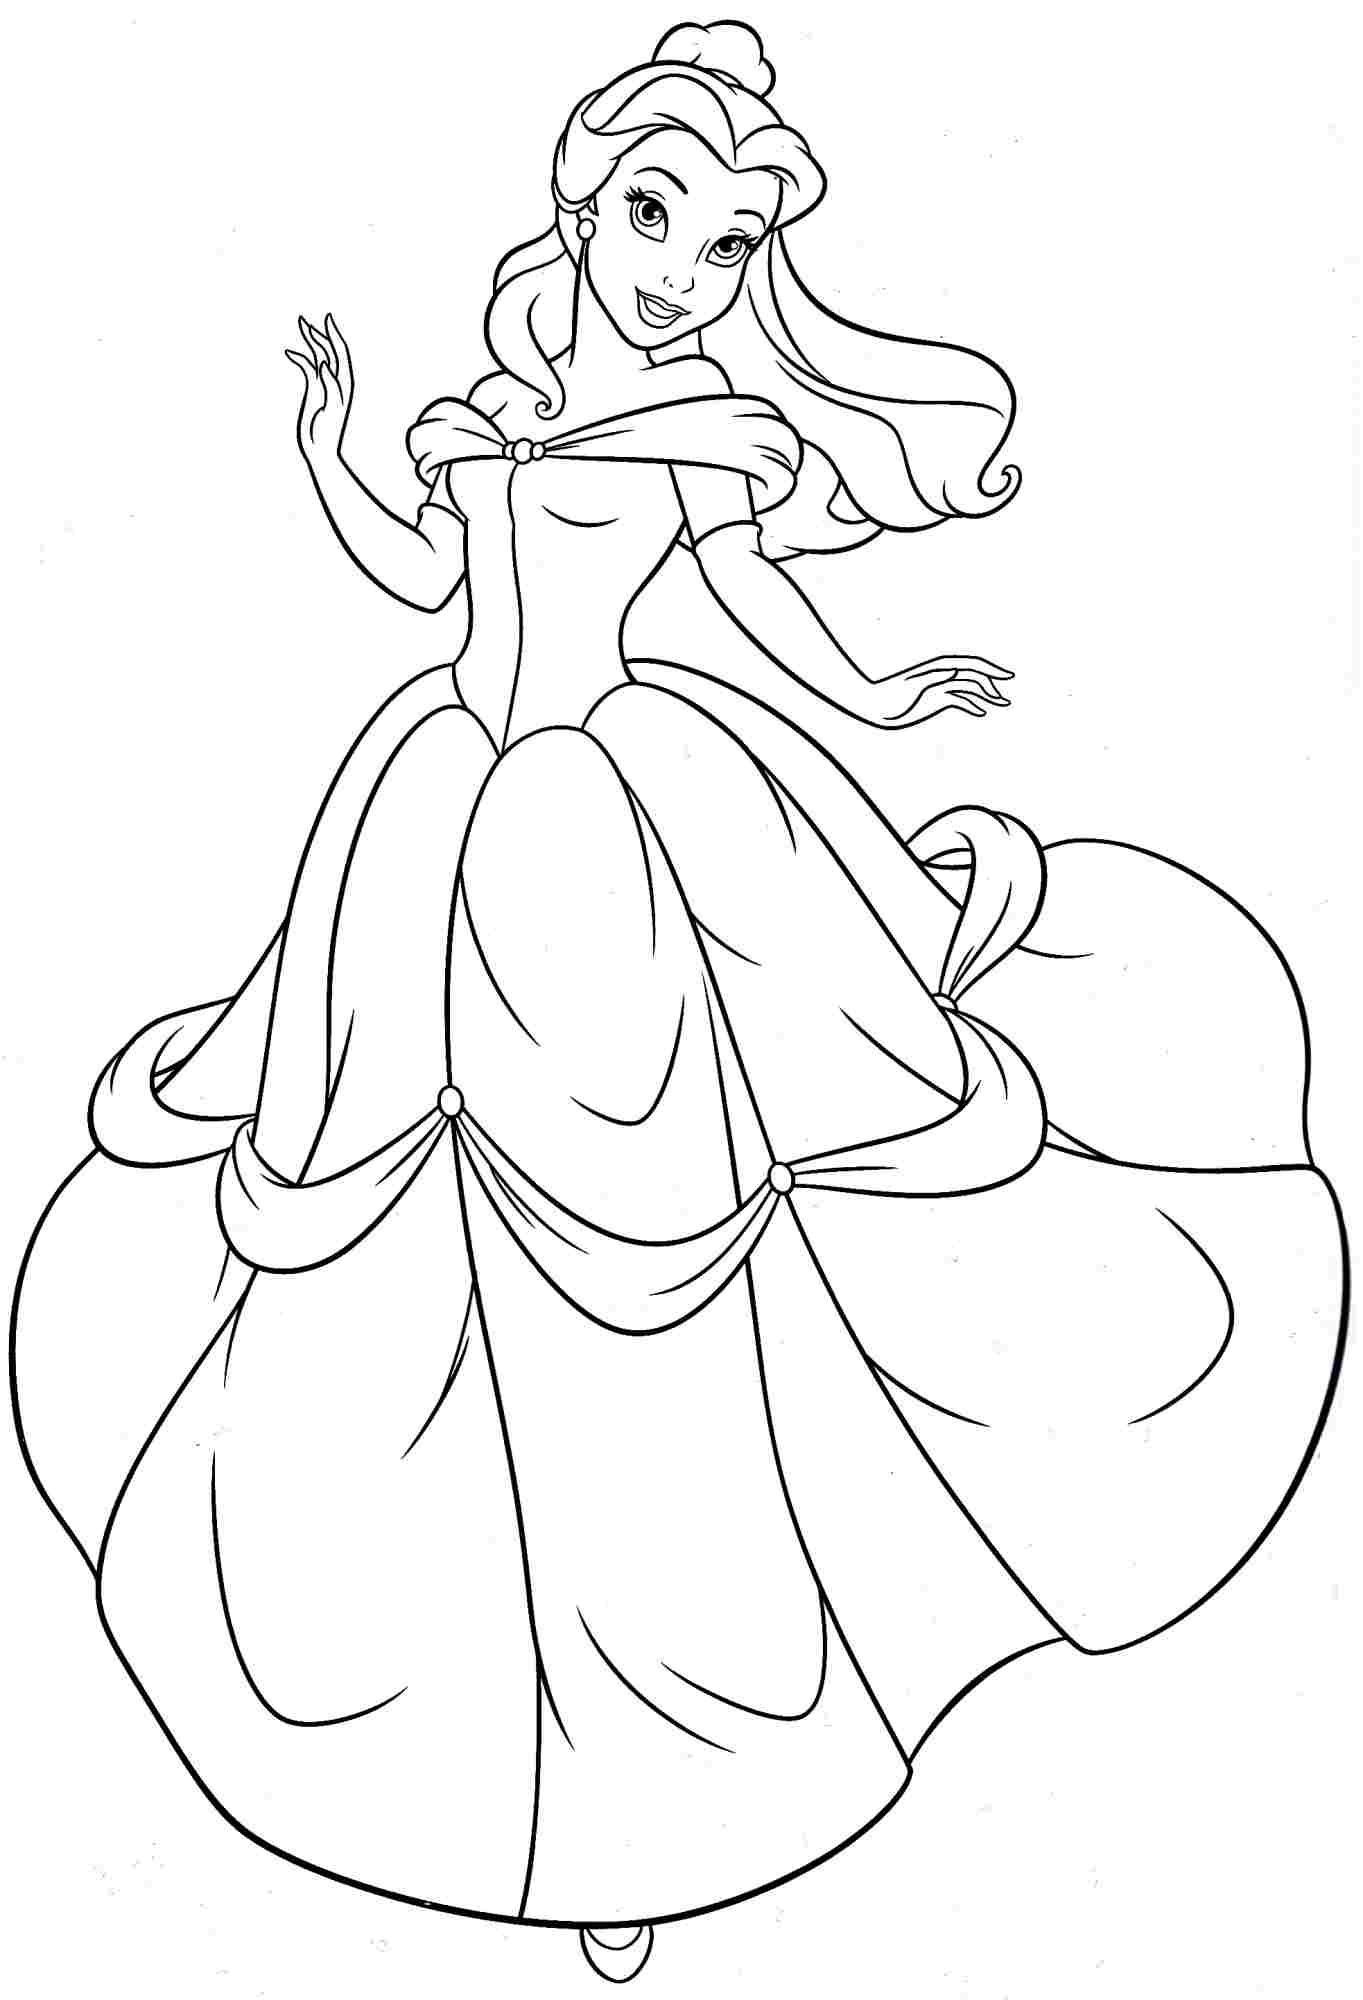 Disney Coloring Pages For Girls
 Disney Princess Belle Coloring Pages For Girls